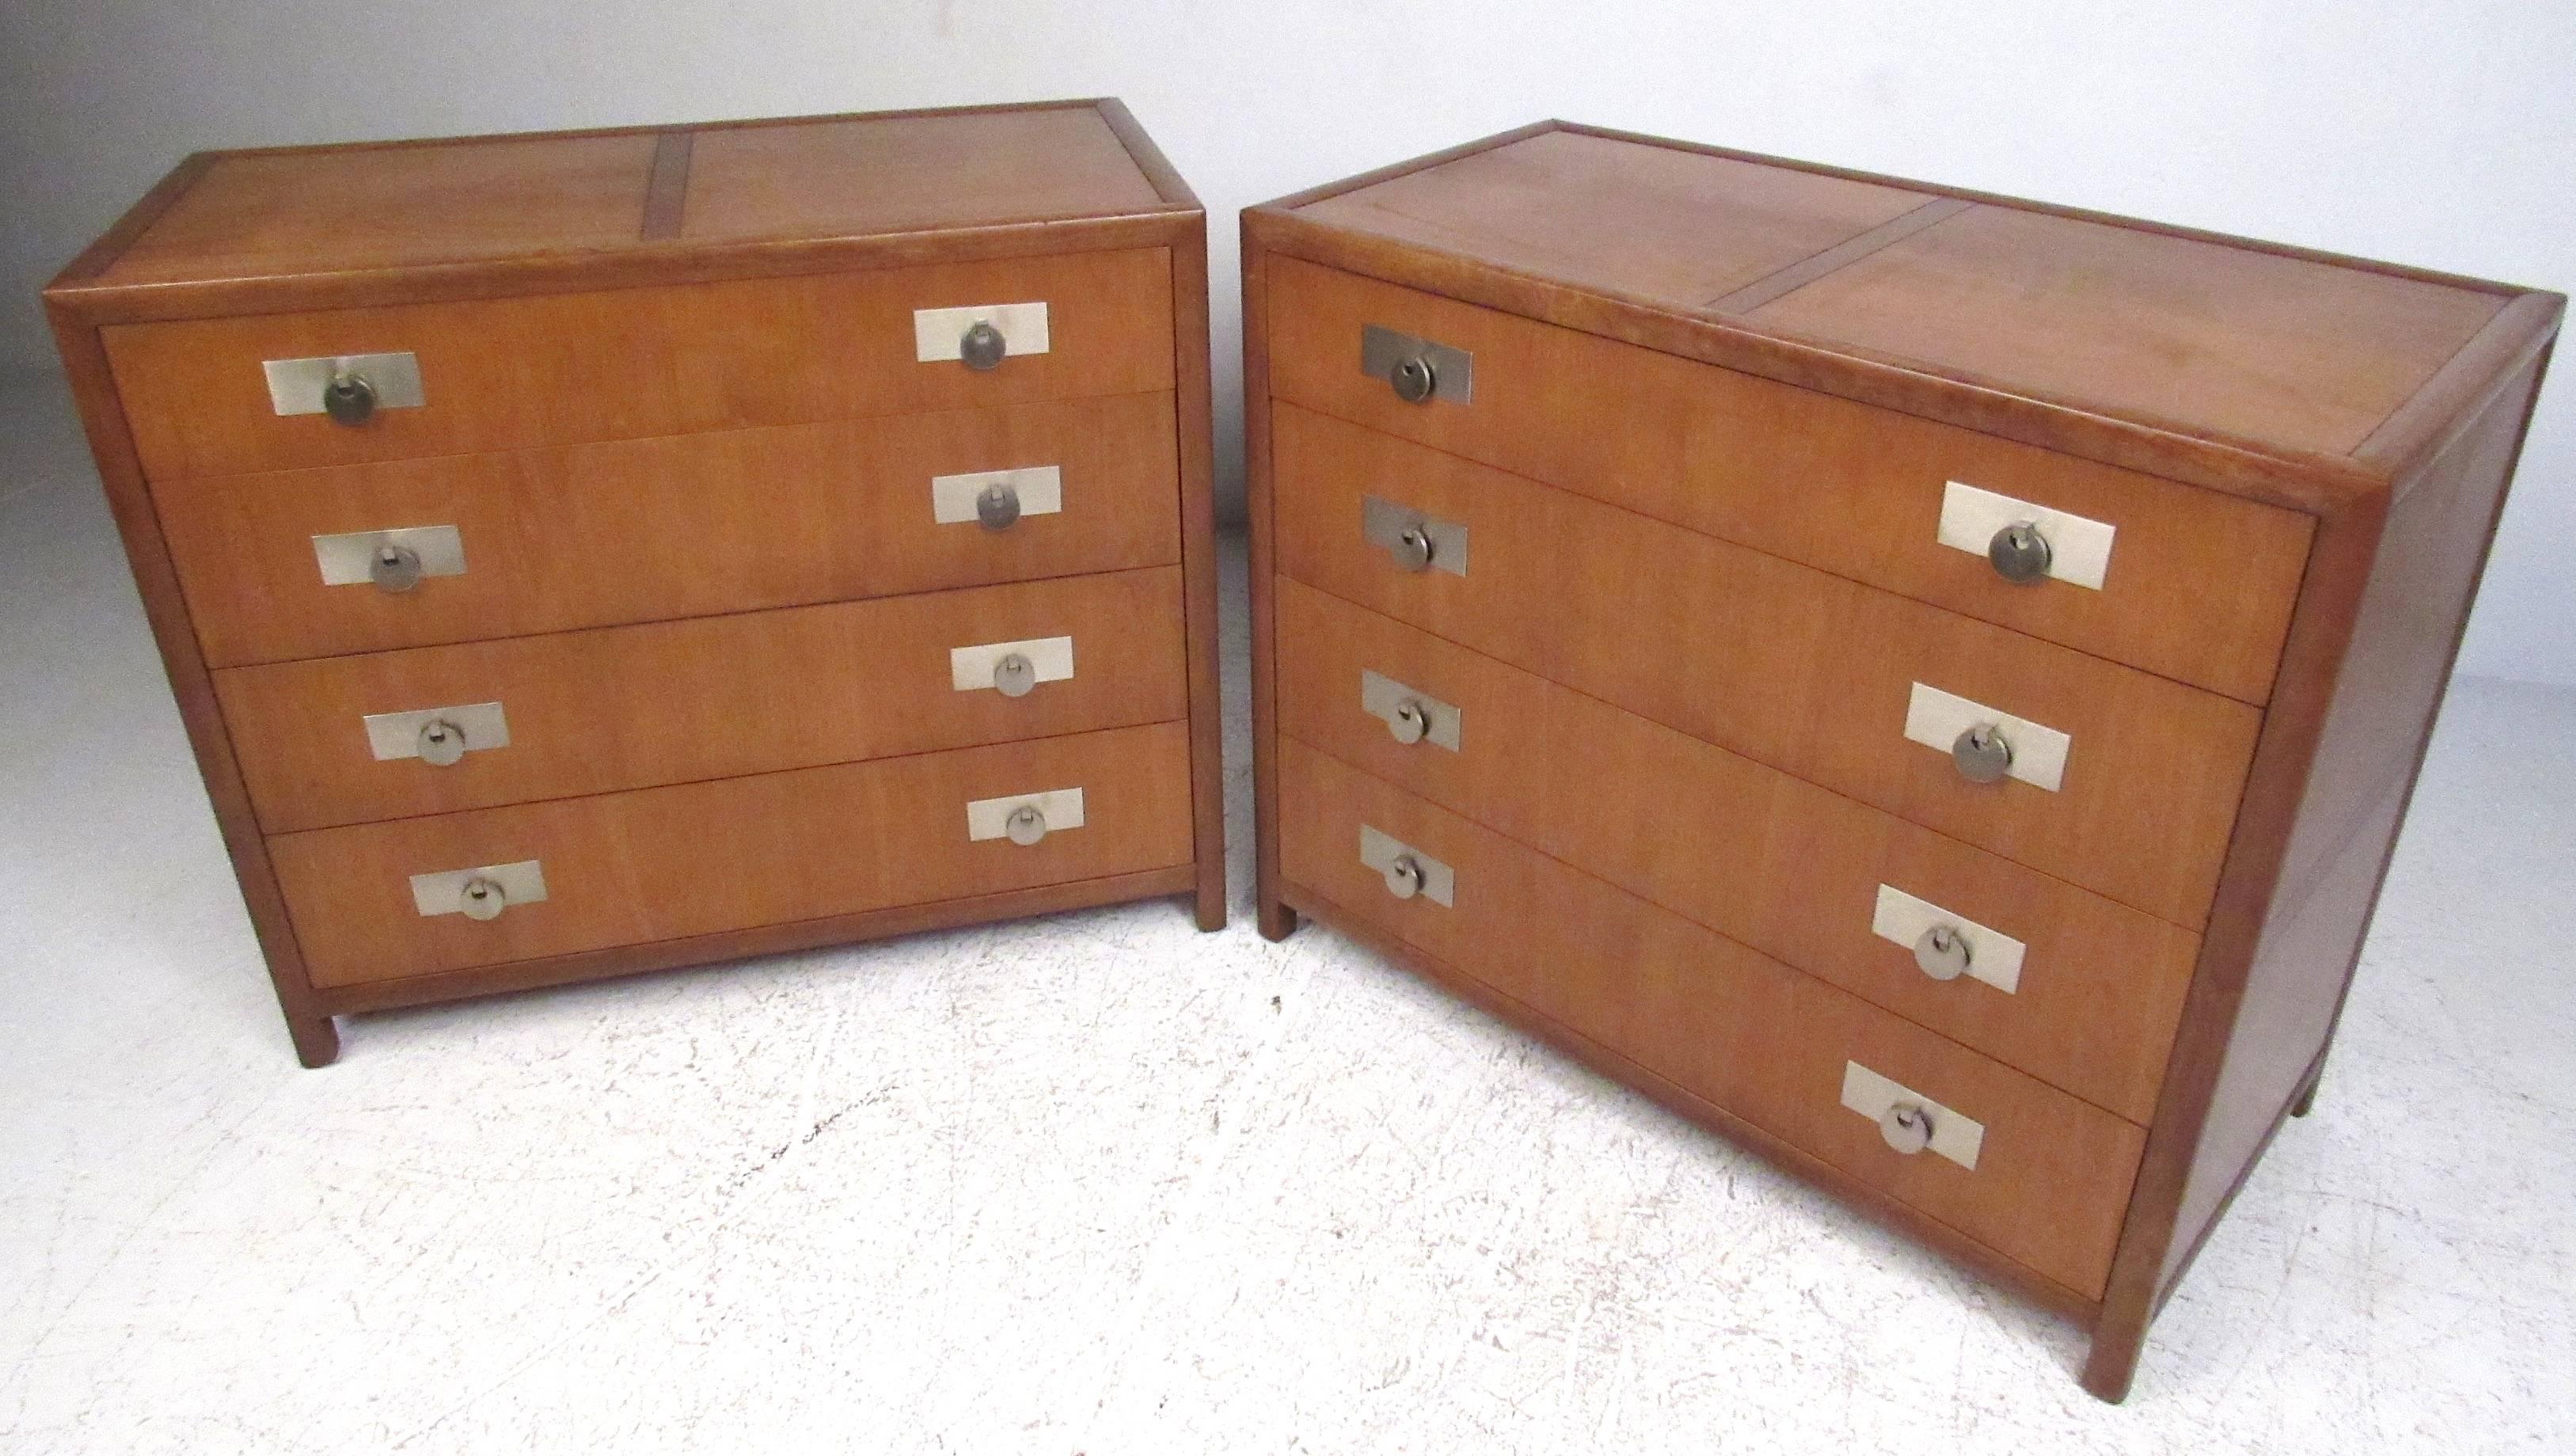 Beautifully detailed matching pair of four drawer dressers by Michael Taylor for Baker, New World collection. Stunning finish and spacious drawers add to the vintage modern appeal of this exquisite pair of bachelor chests. Please confirm item